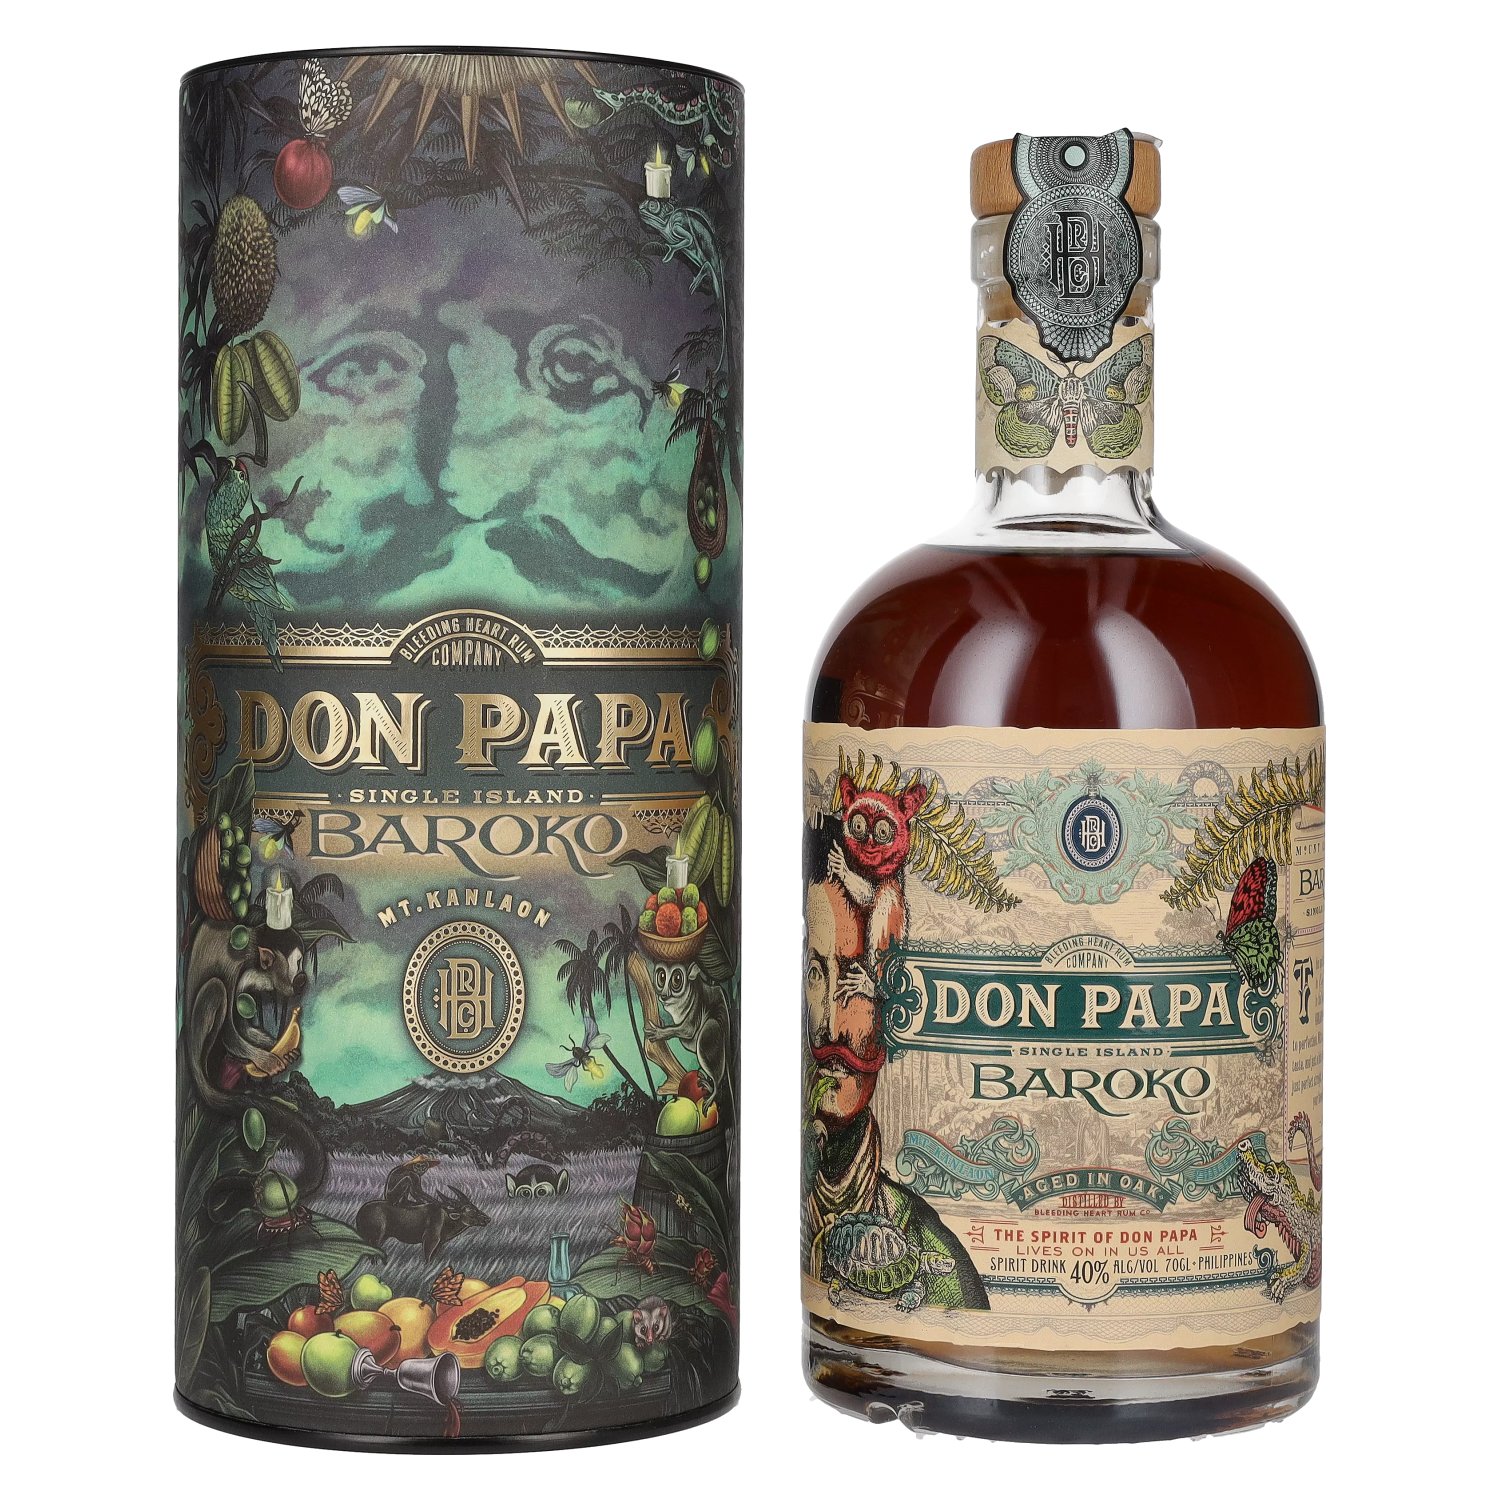 Don Papa Limited in Edition Vol. 40% Canister BAROKO 0,7l Giftbox Harvest